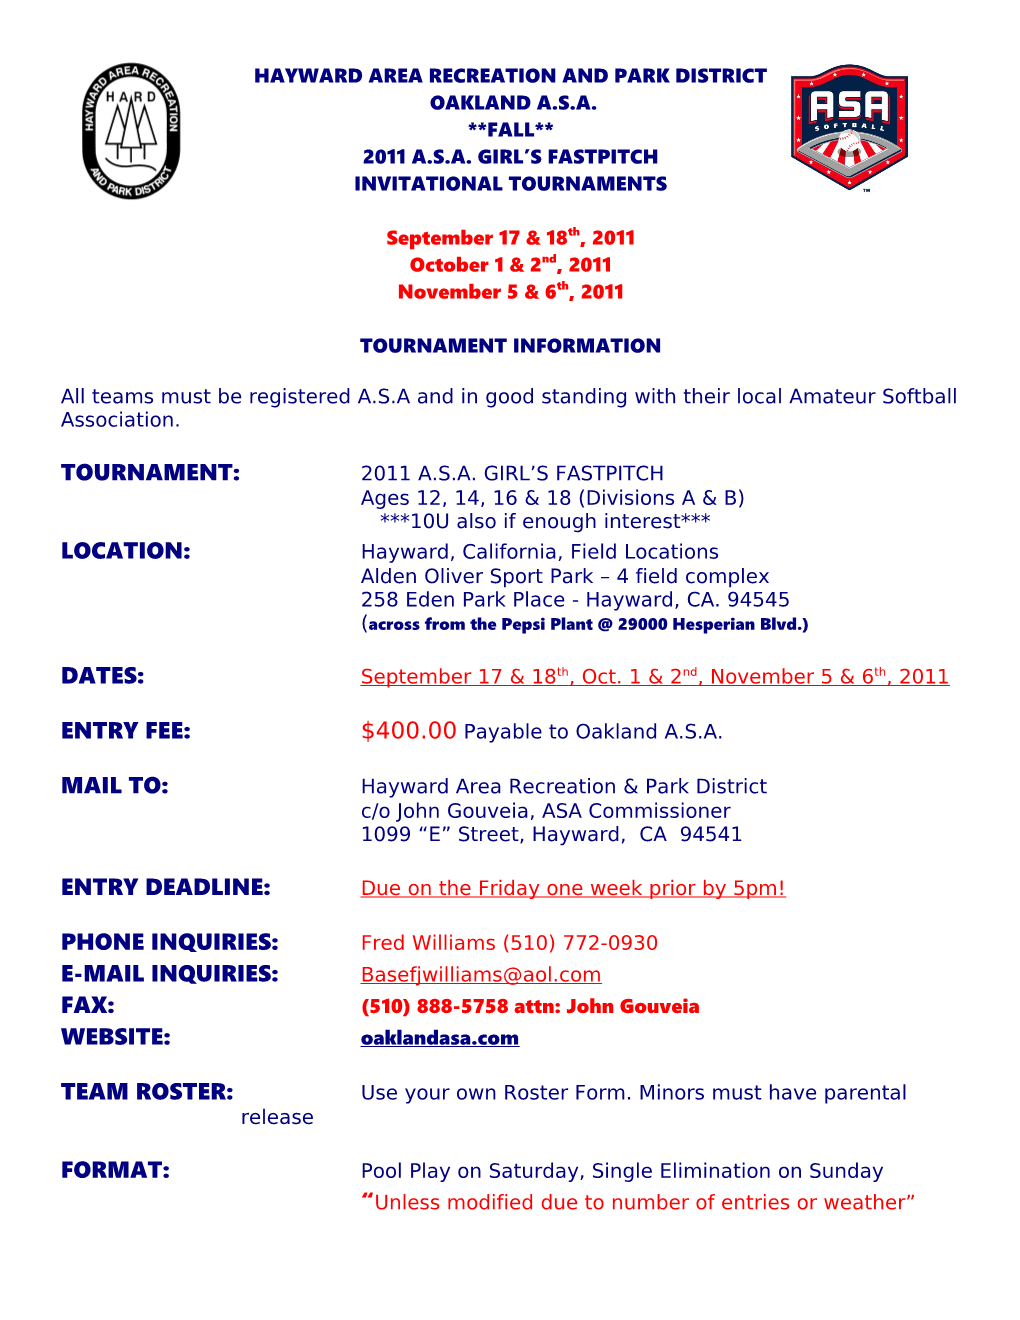 Tourney Rules - Slowpitch